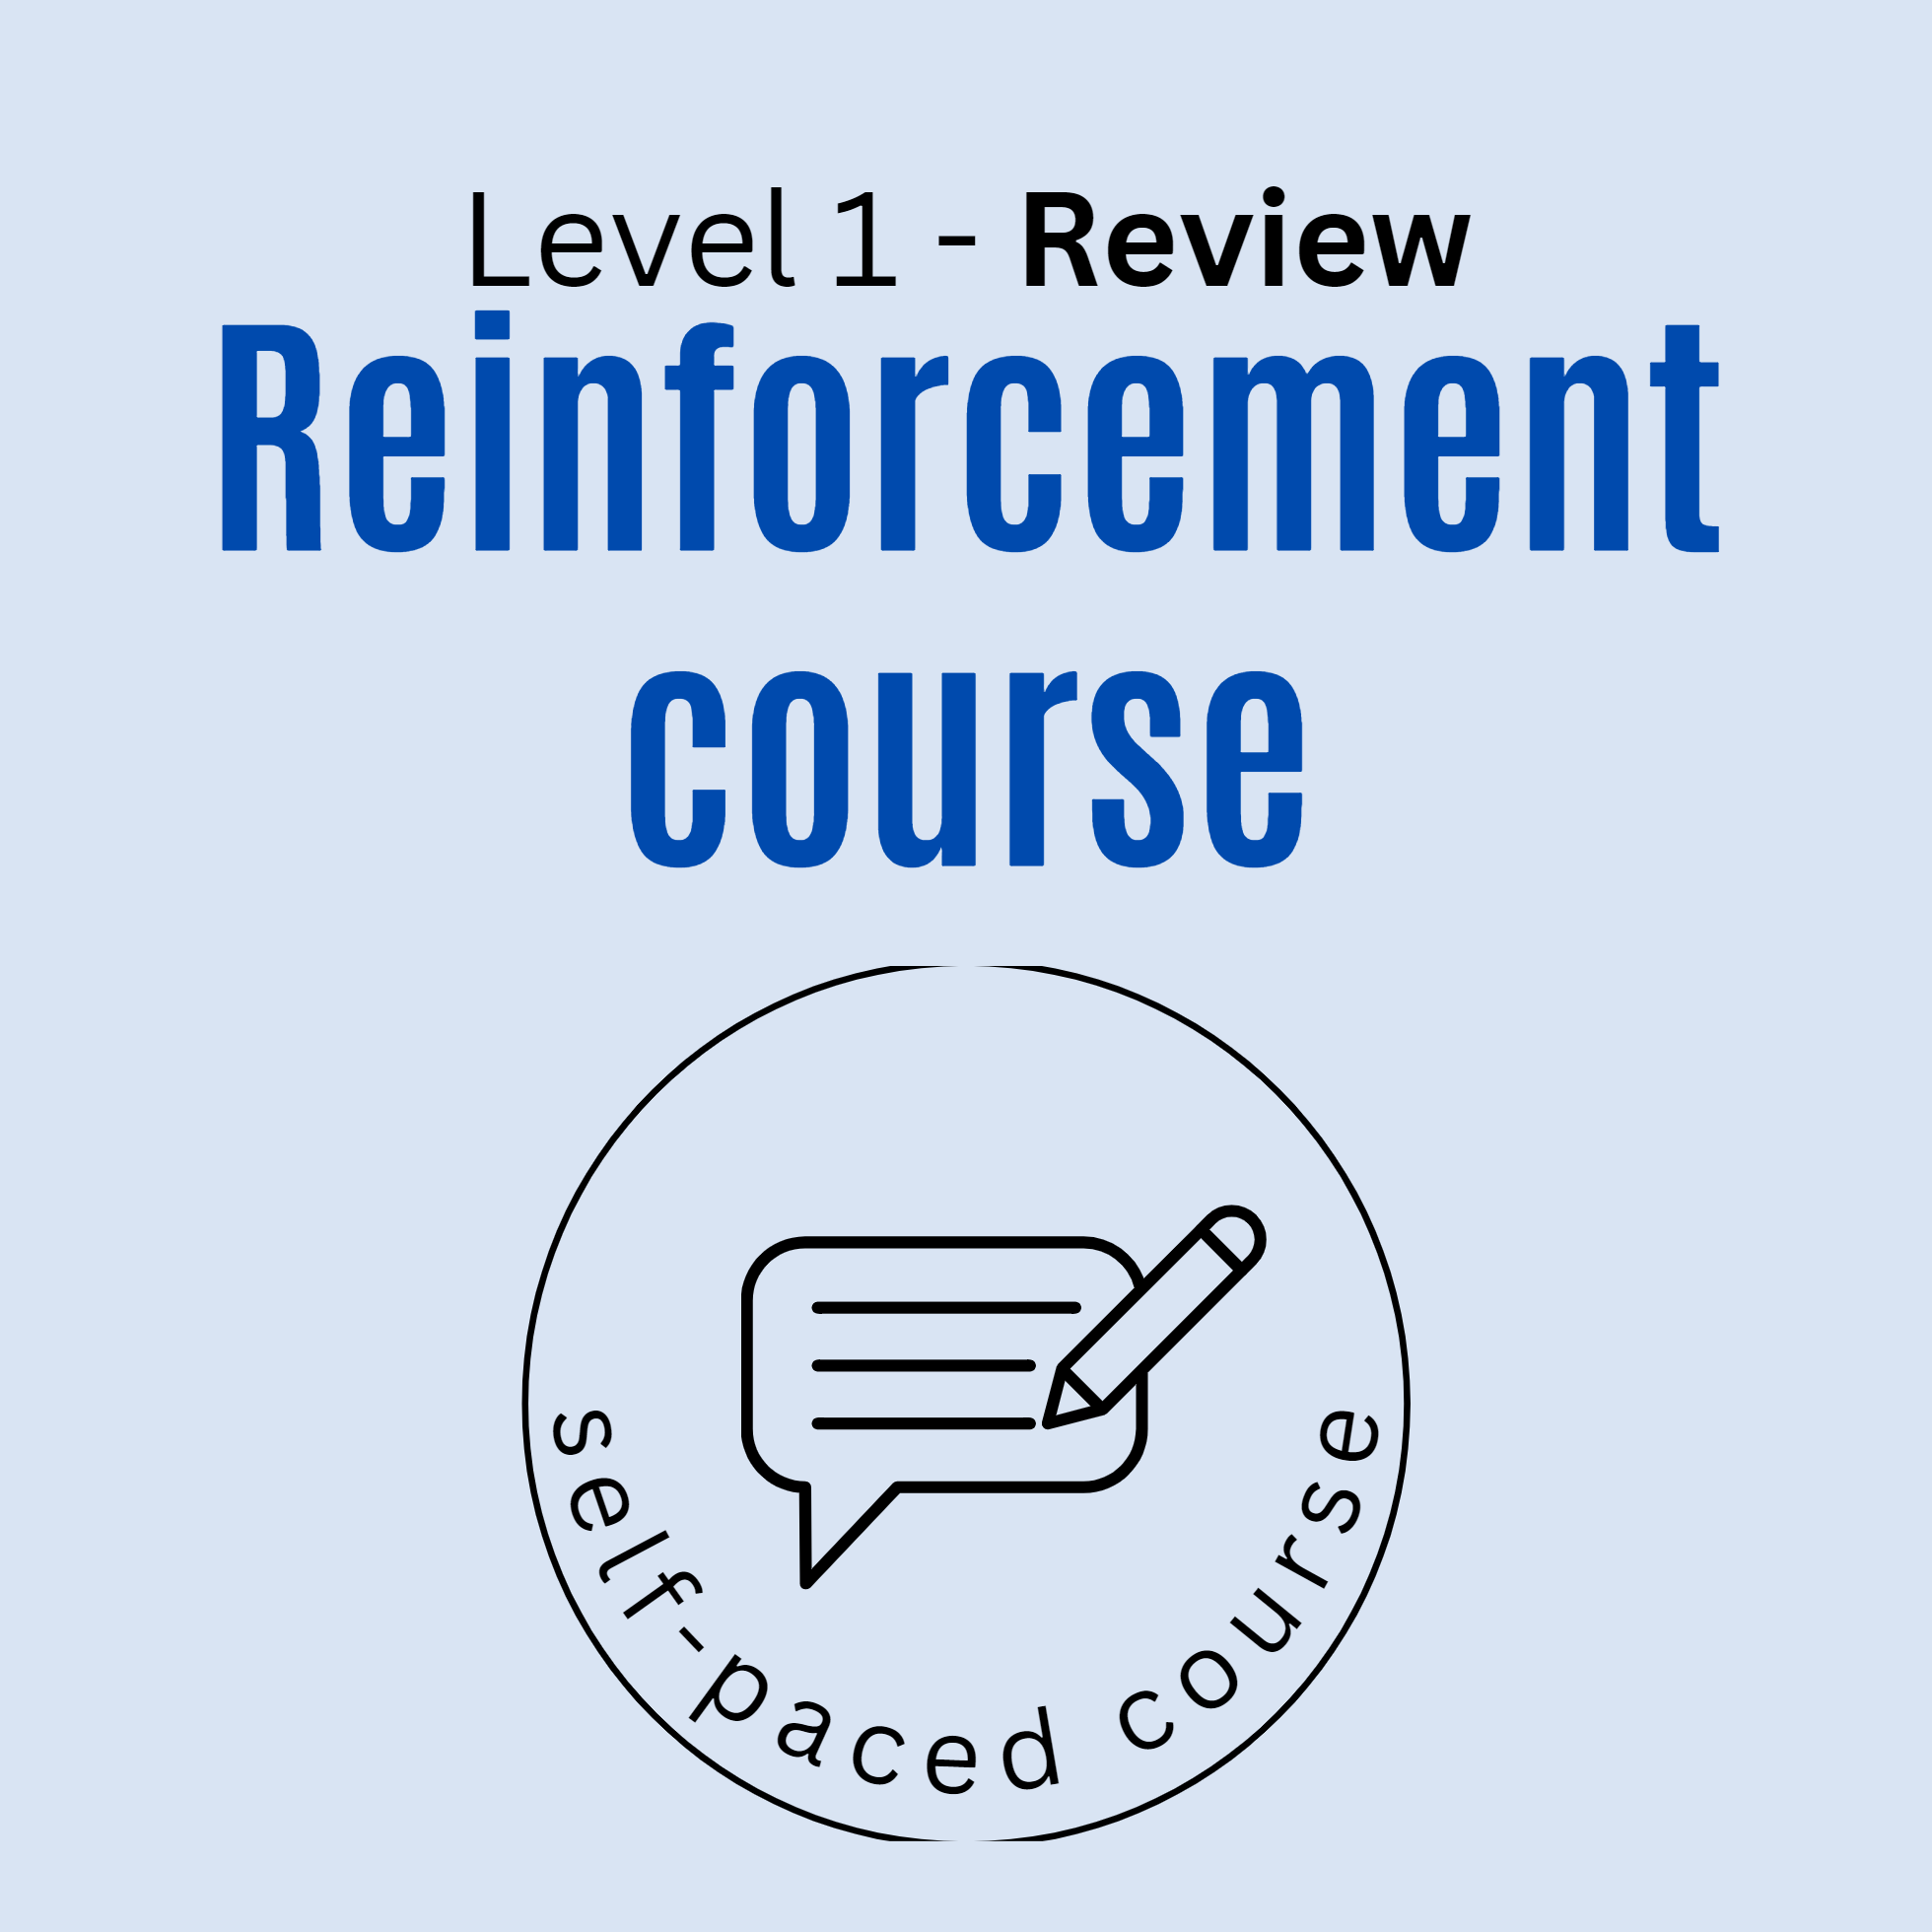 Level 1 Foundation Course Review